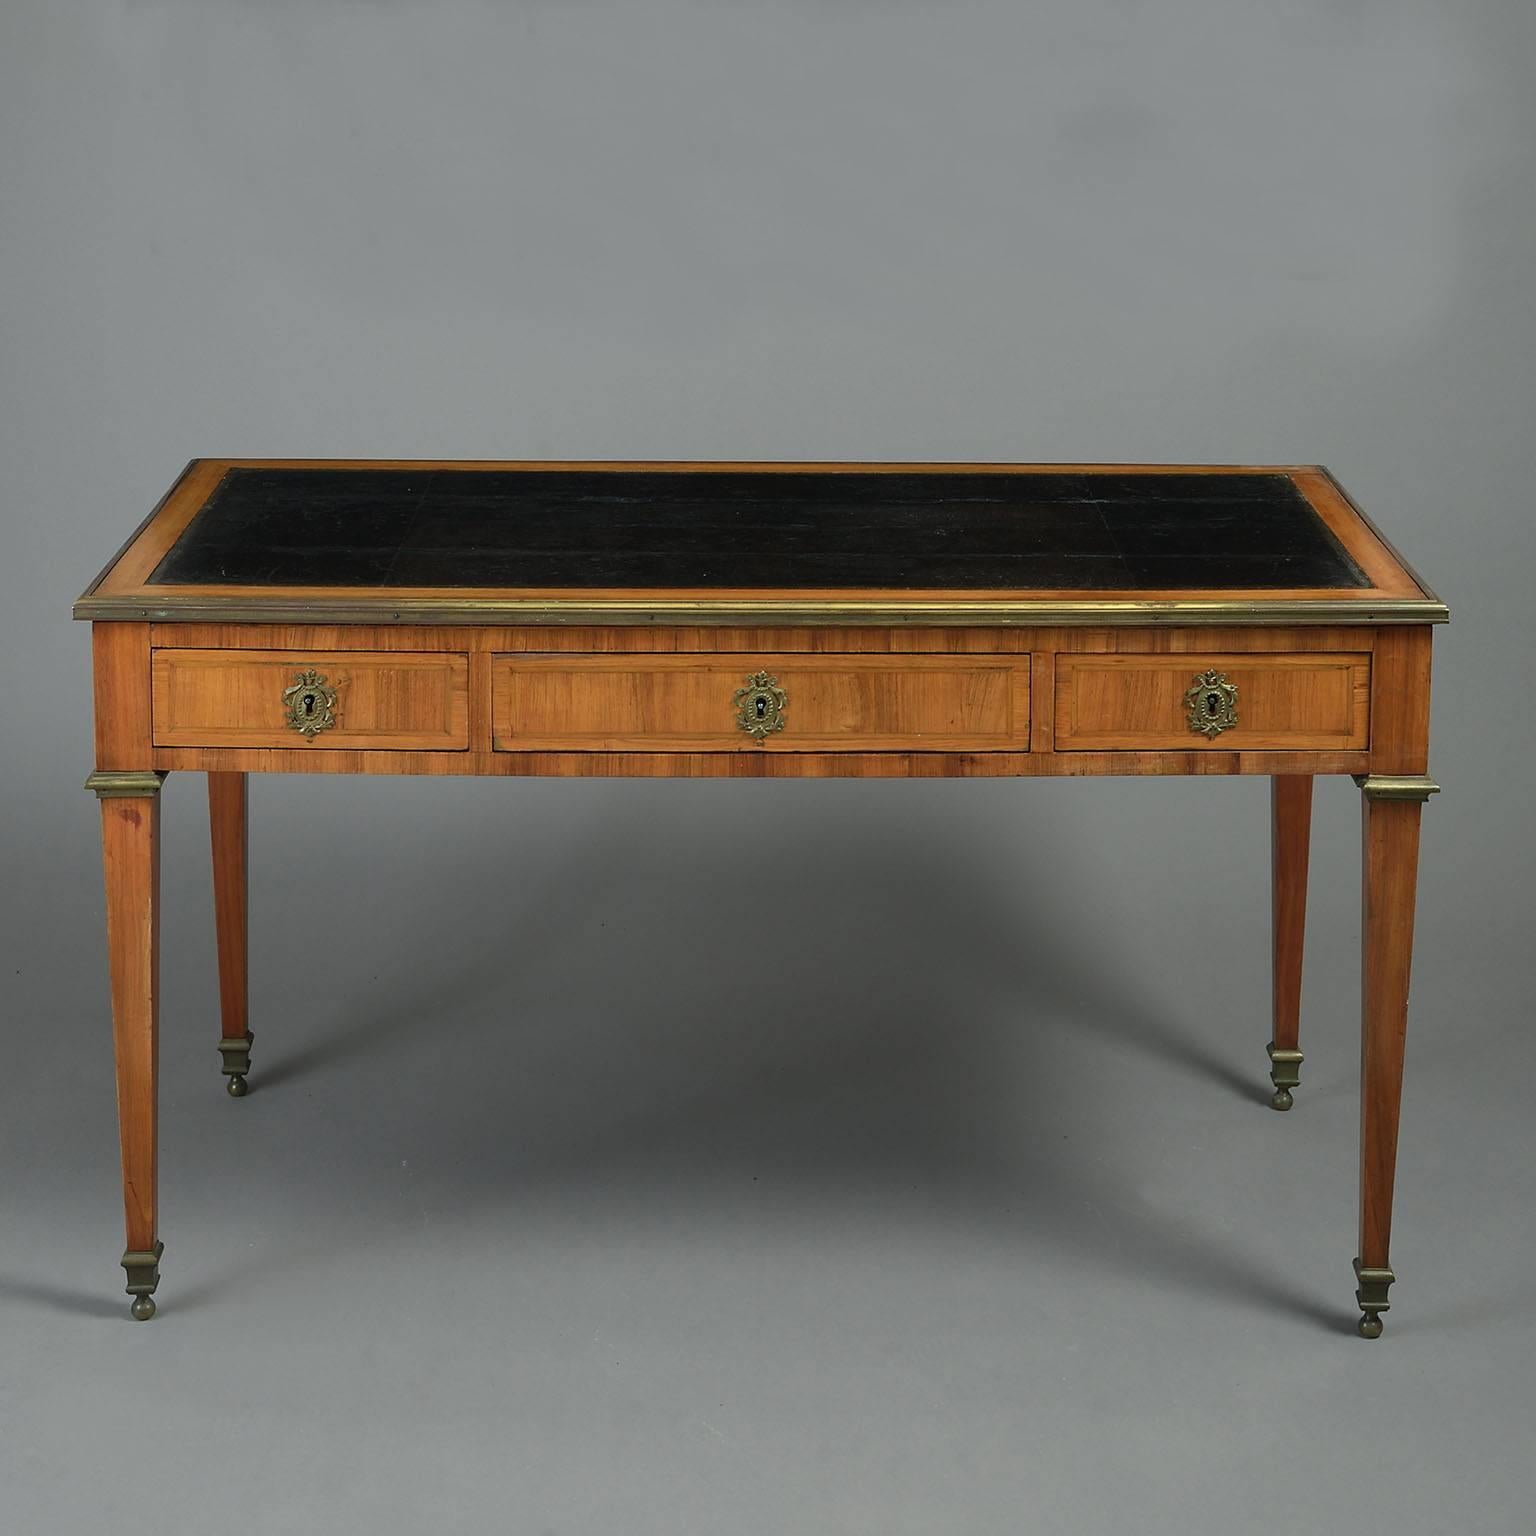 The black leather inset top with cross-banded border and brass edging over a frieze veneered on all sides with cross-banded panels and having three raised on square tapering legs with brass moulded collars and ball feet. 


circa 1780

Depth: 64cm /